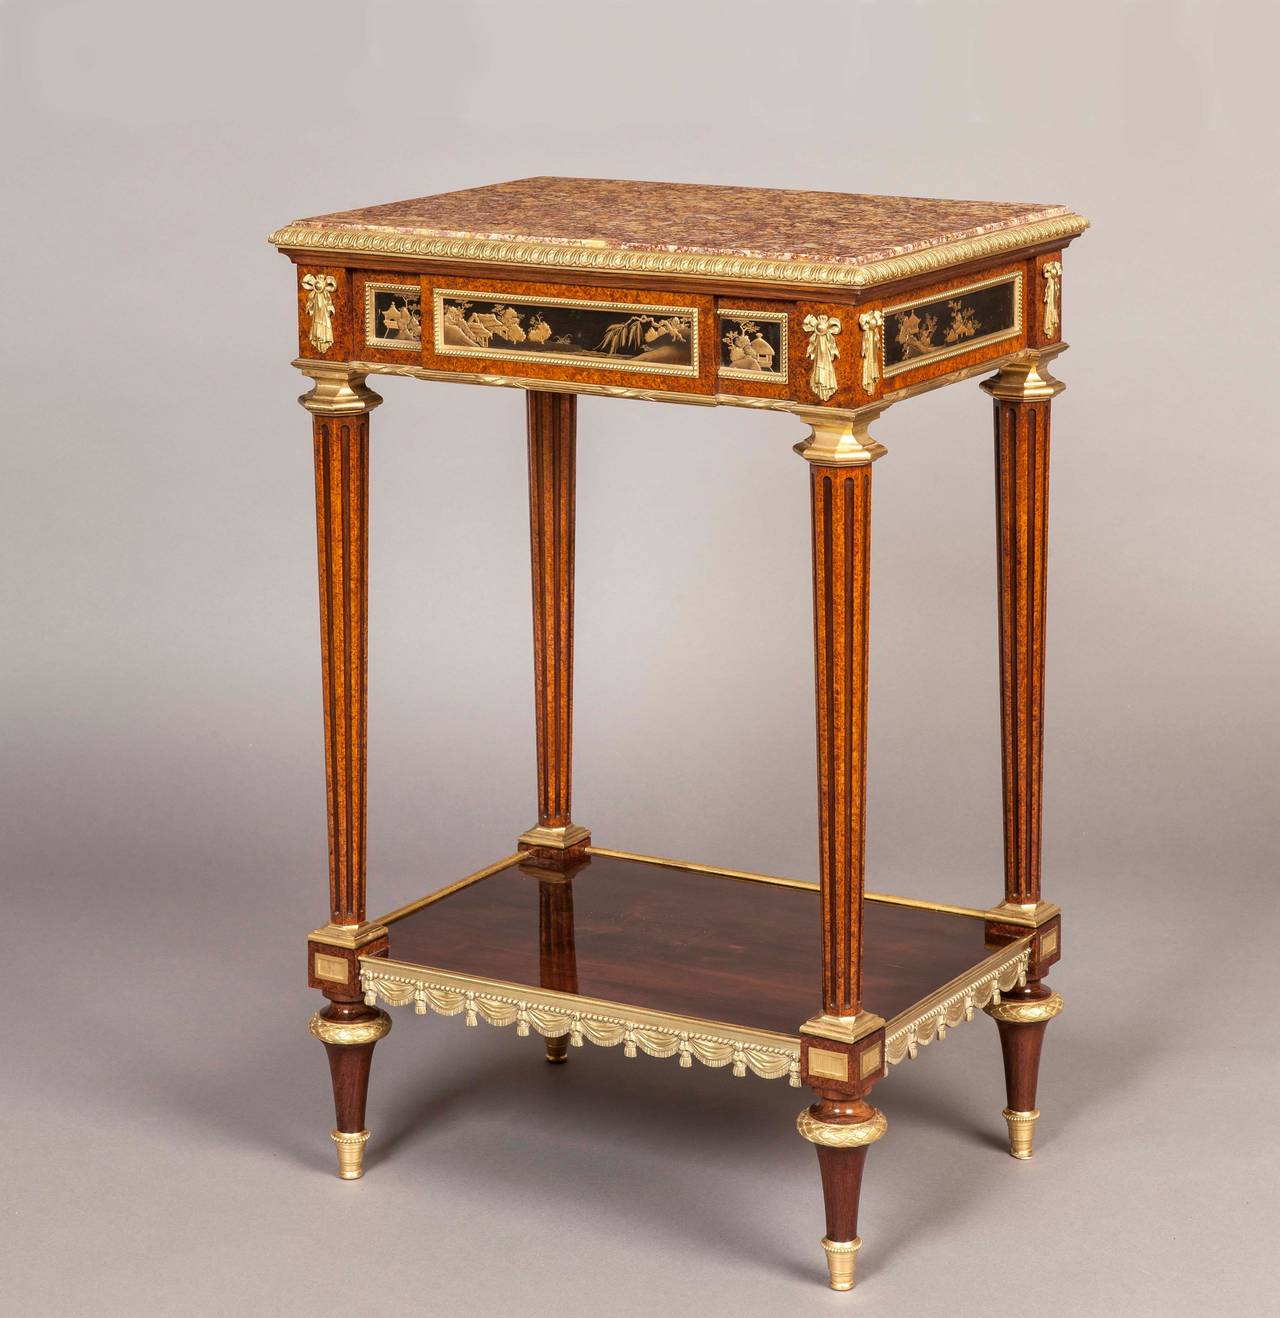 Of rectangular form, constructed in amboyna and mahogany dressed with chinoiserie panels, and fine ormolu mounts; rising from ormolu mounted toupie feet, supporting the lower platform, itself adorned with running swags; the fluted tapering legs